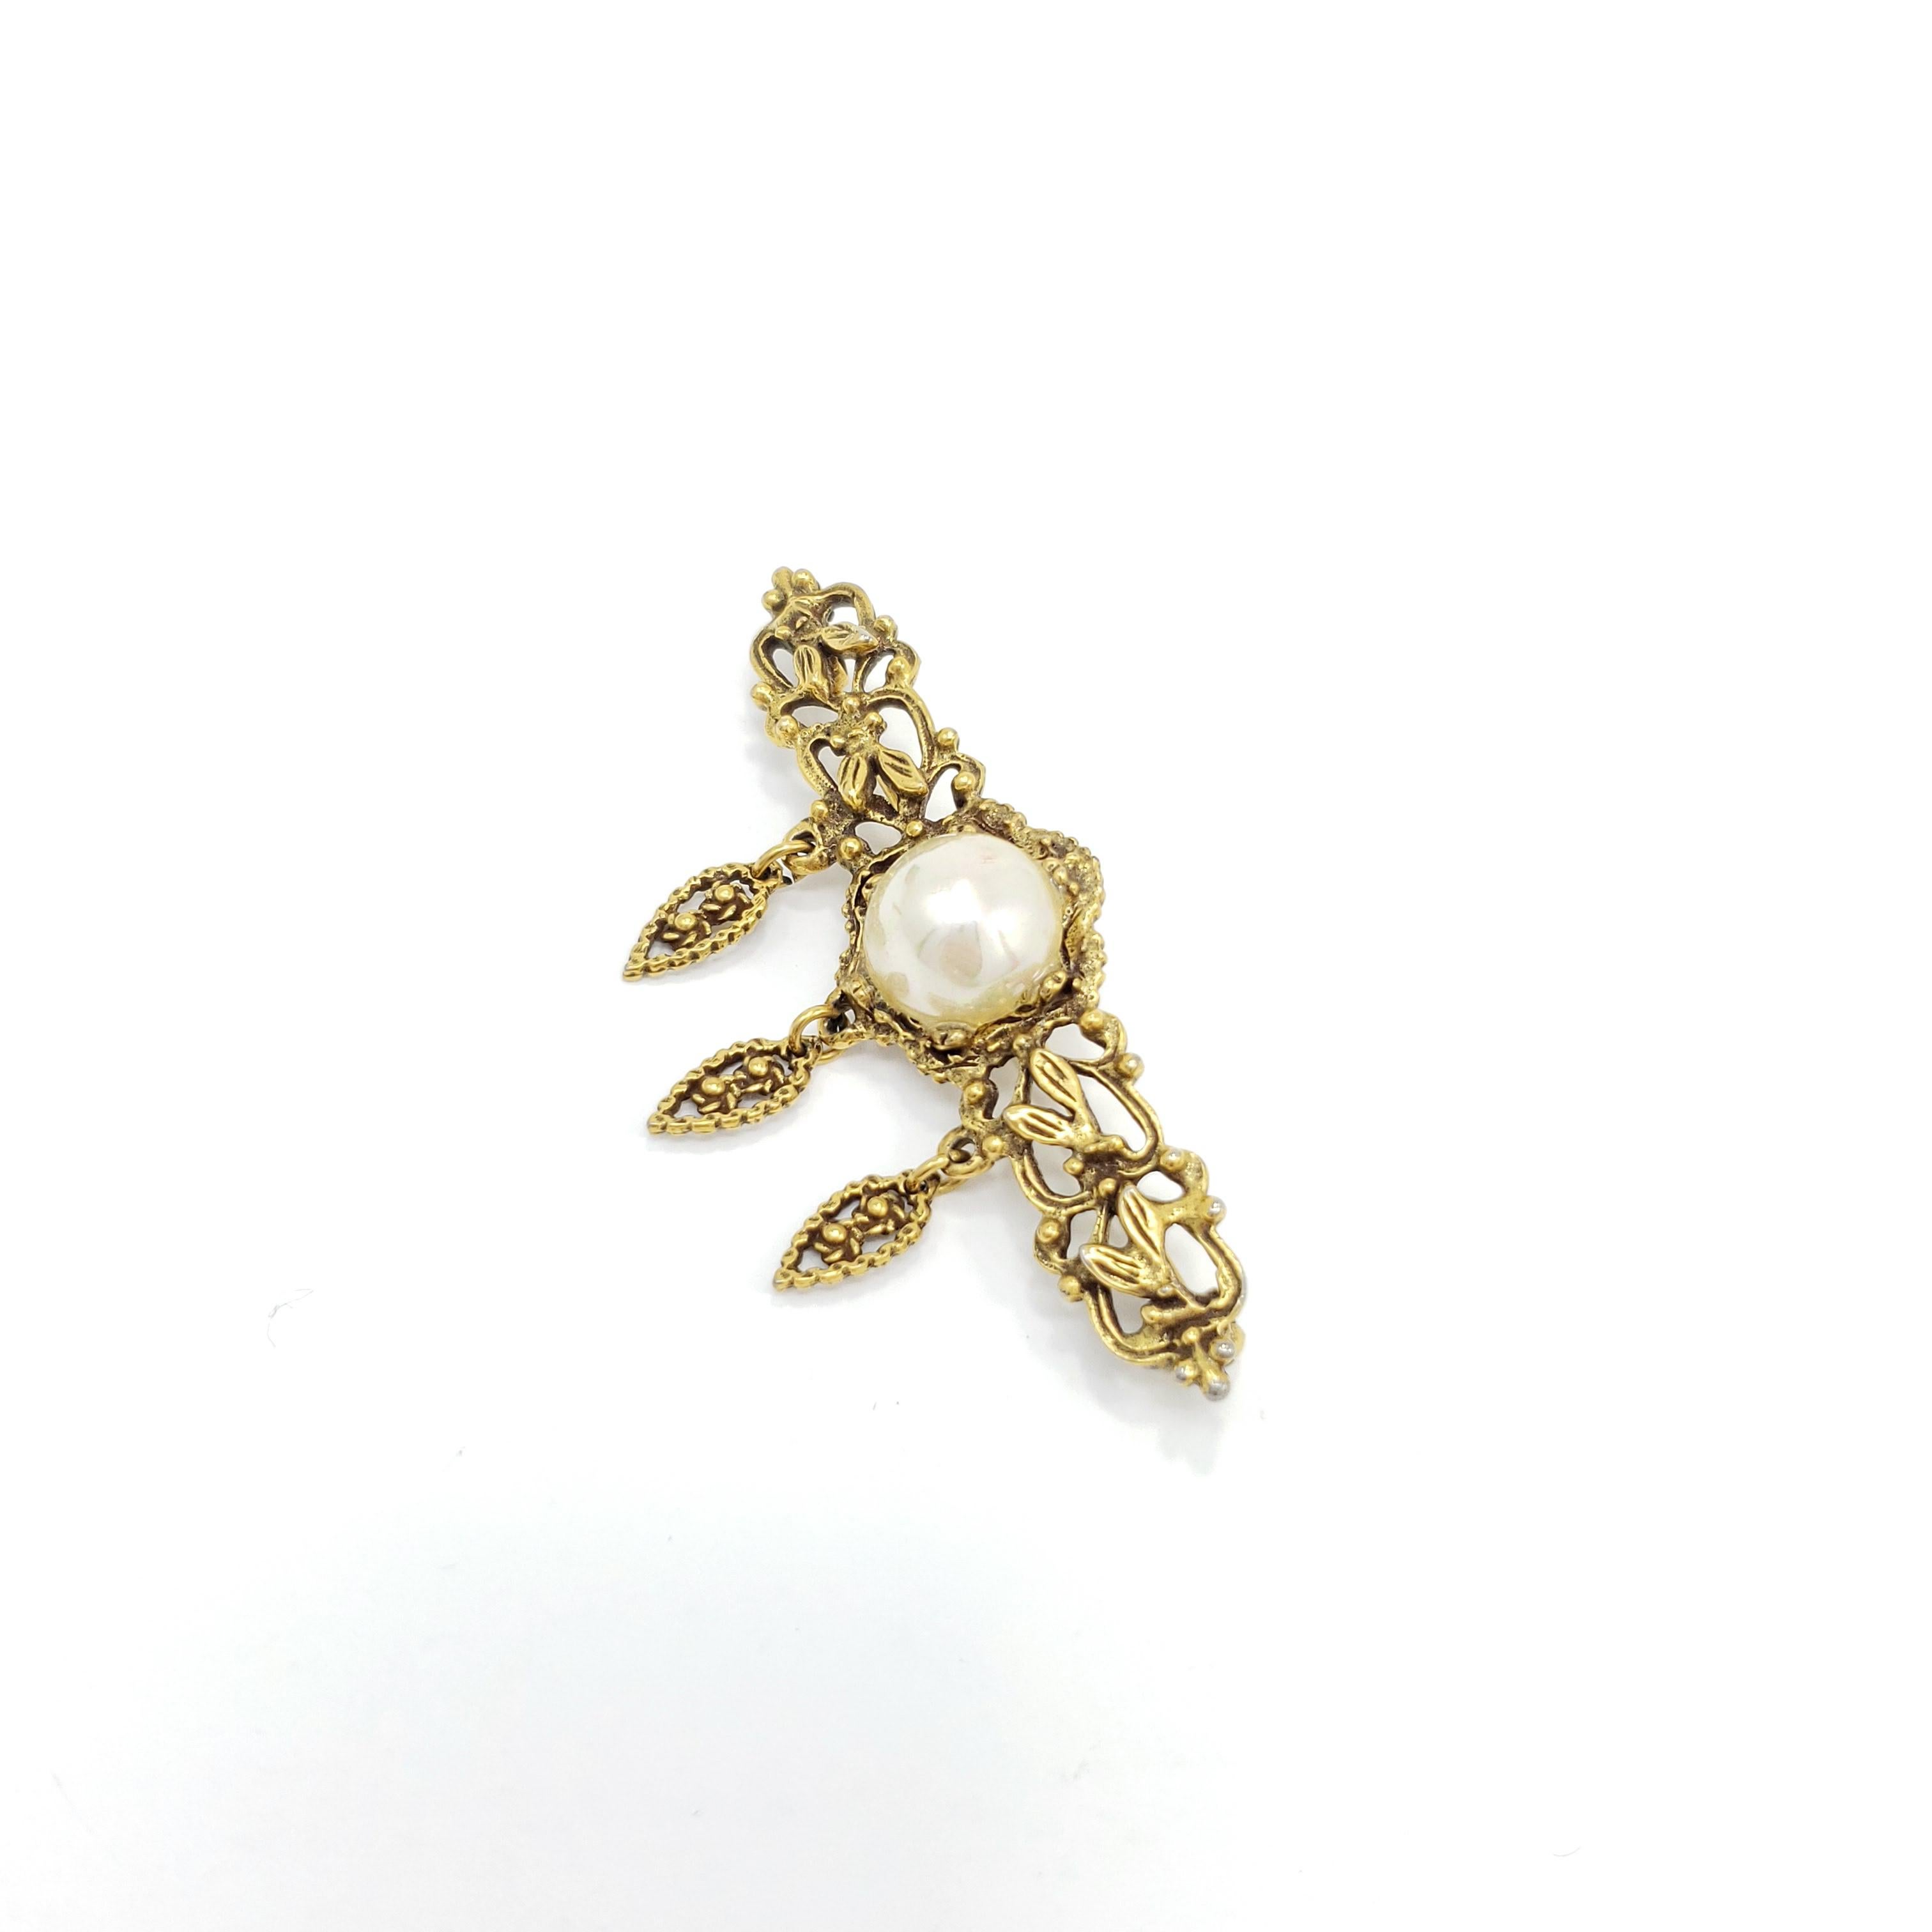 Golden elegance! This mid 1900s, Victorian-style brooch features exquisite floral motifs with a faux pearl centerpiece.

Gold-plated.